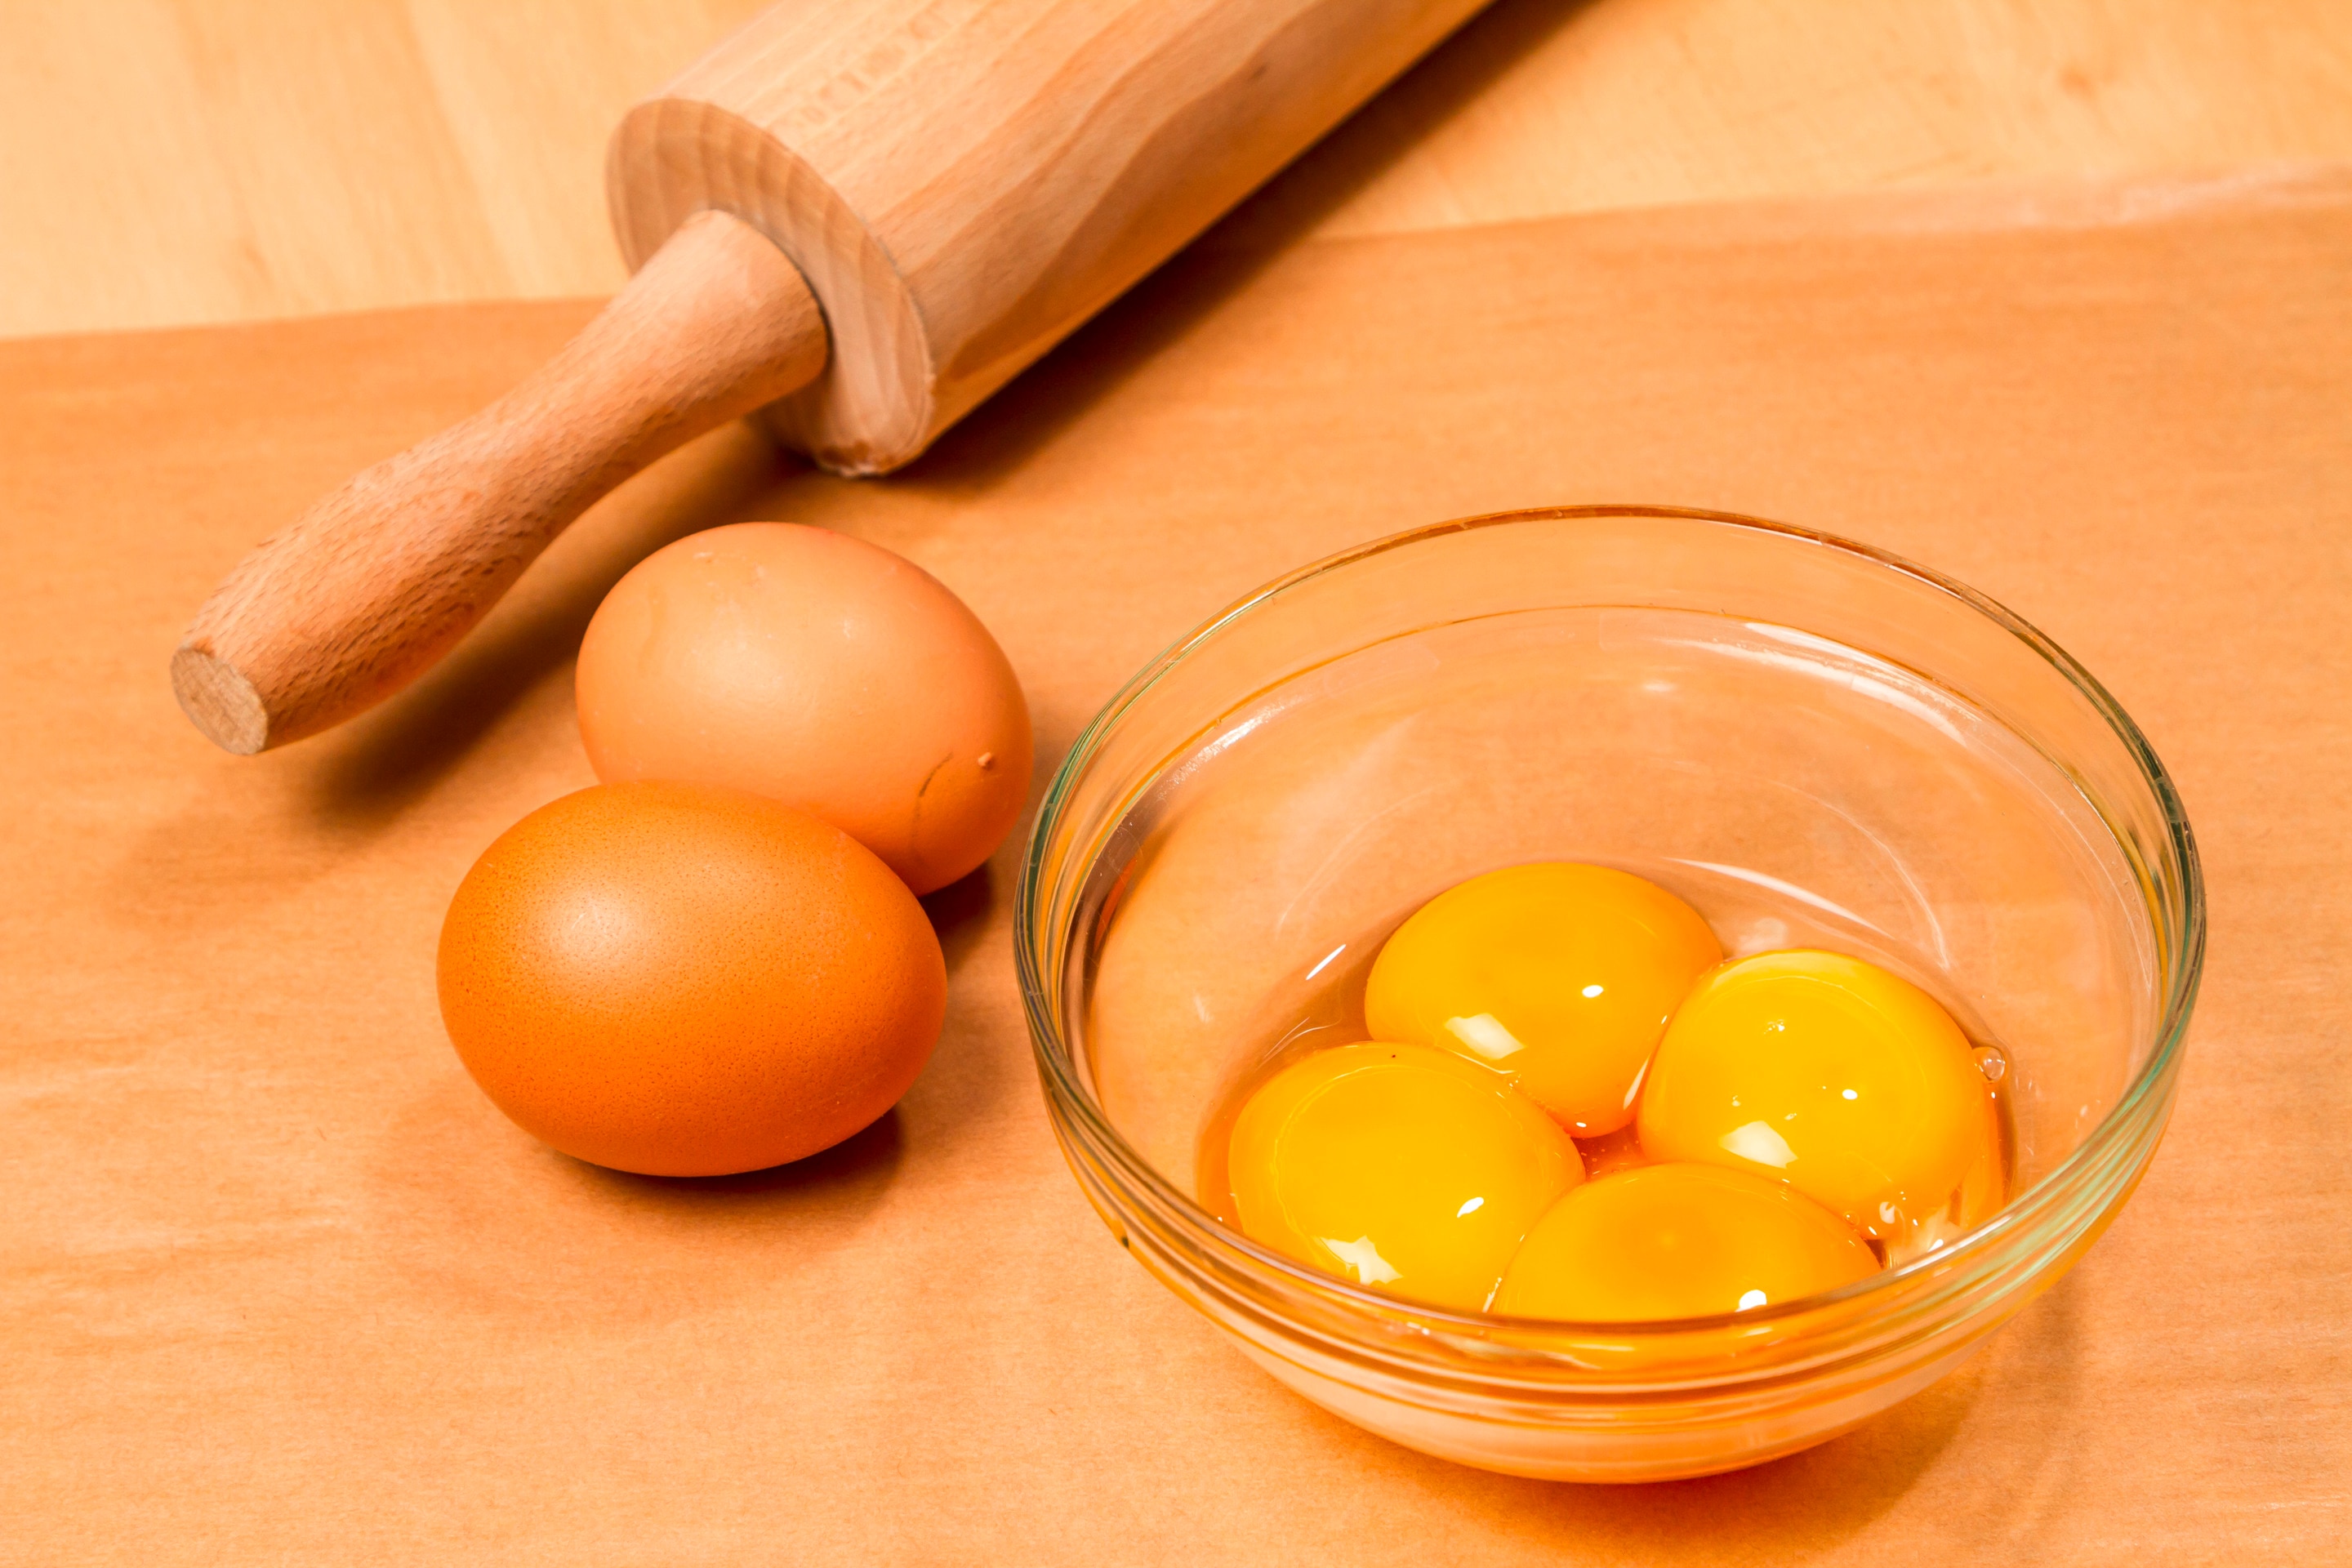 A glass bowl of 4 egg yolks next to 2 whole eggs and a rolling pin on a wooden table